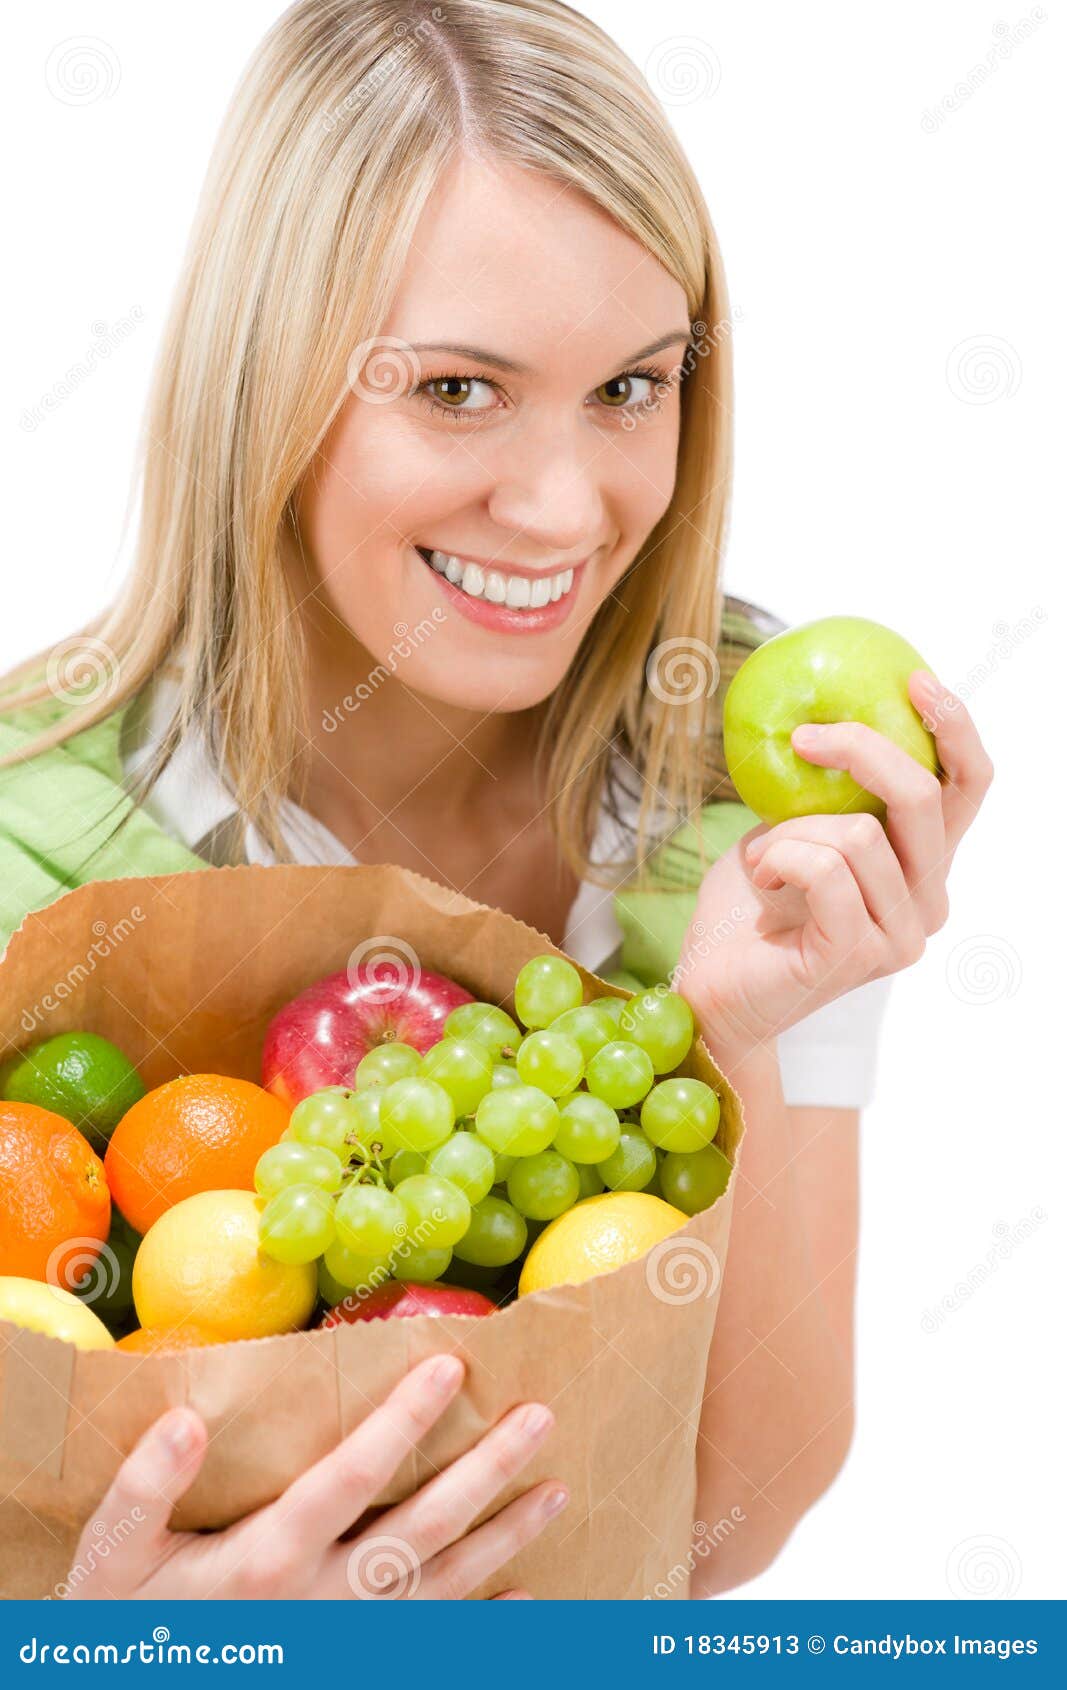 Healthy Lifestyle - Woman With Fruit In Paper Bag Stock Photos - Image ...